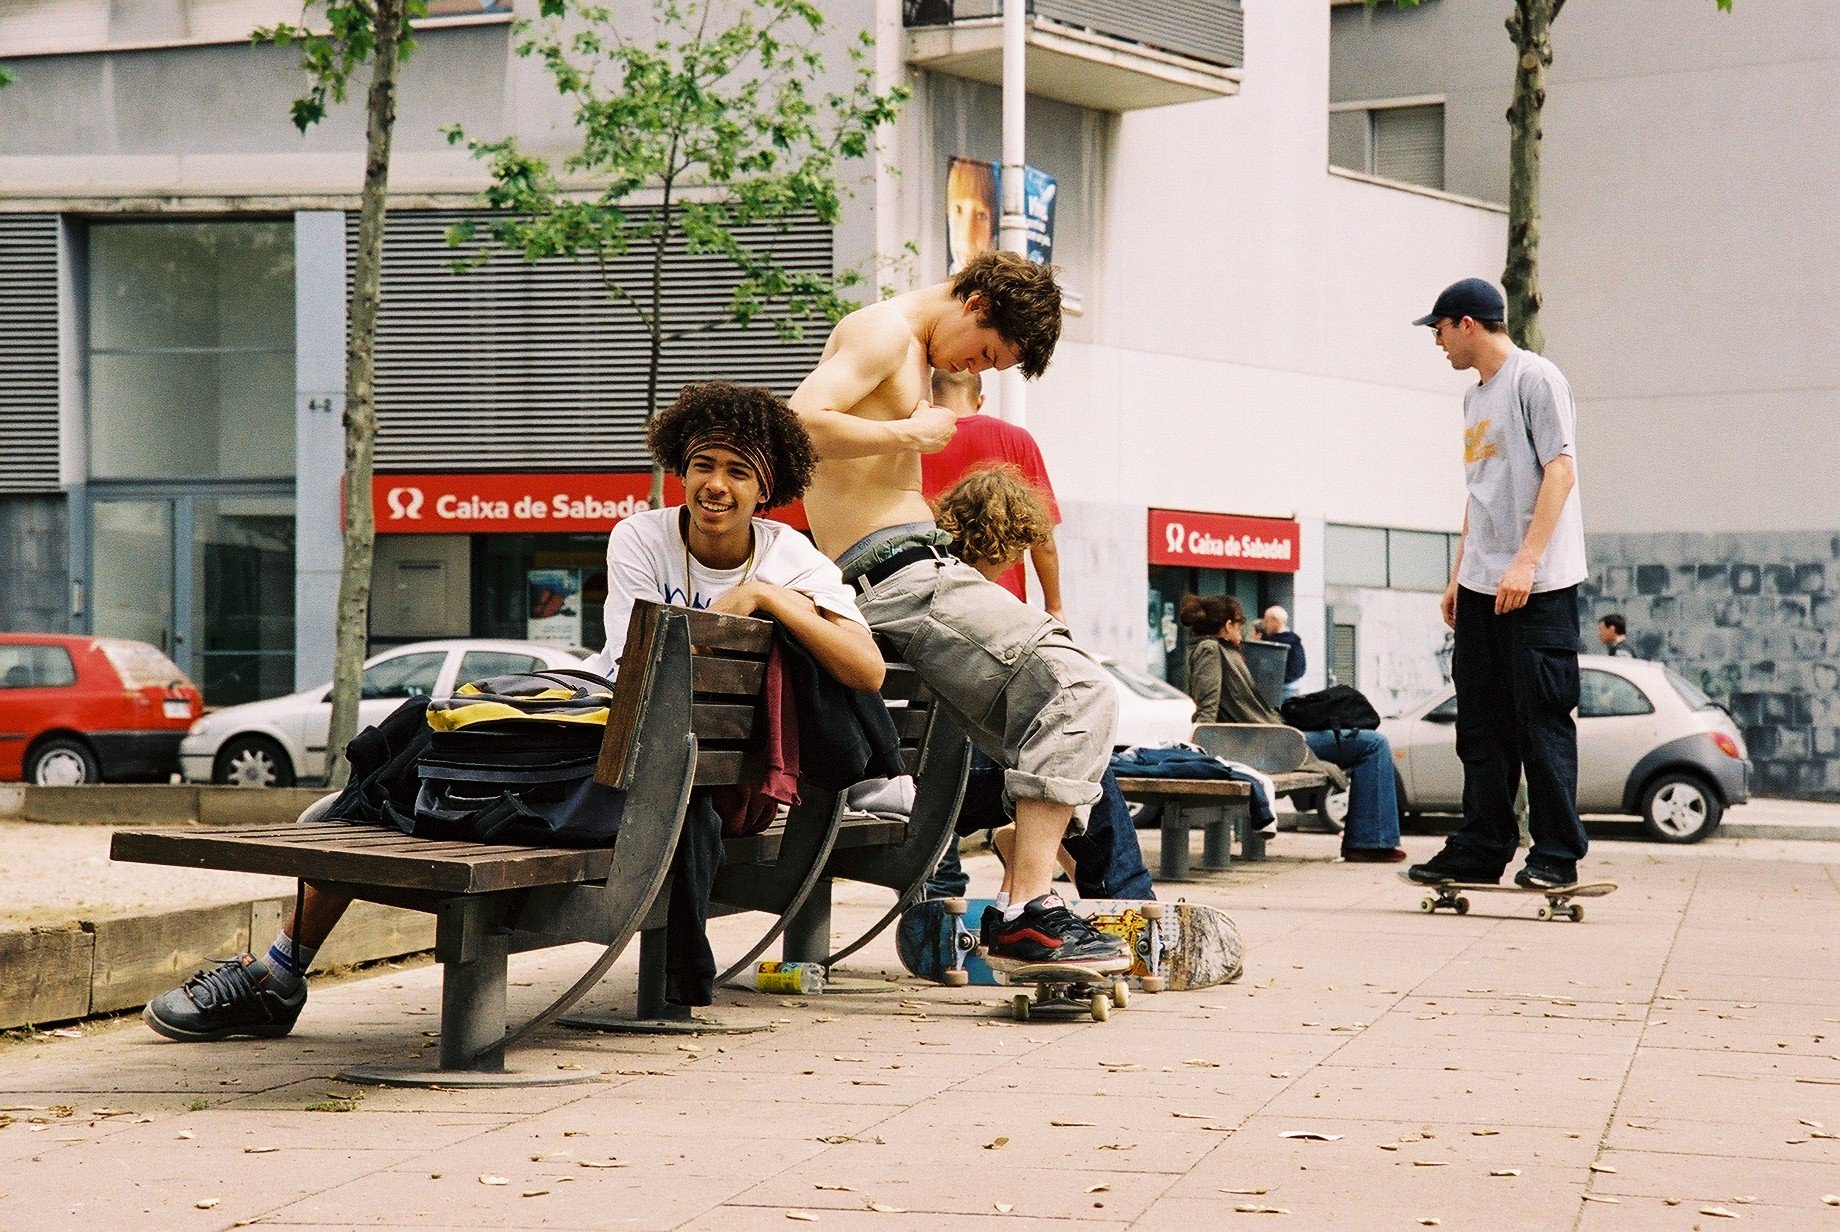  Fifty-Fifty Skate Team in Barcelona in 2003 